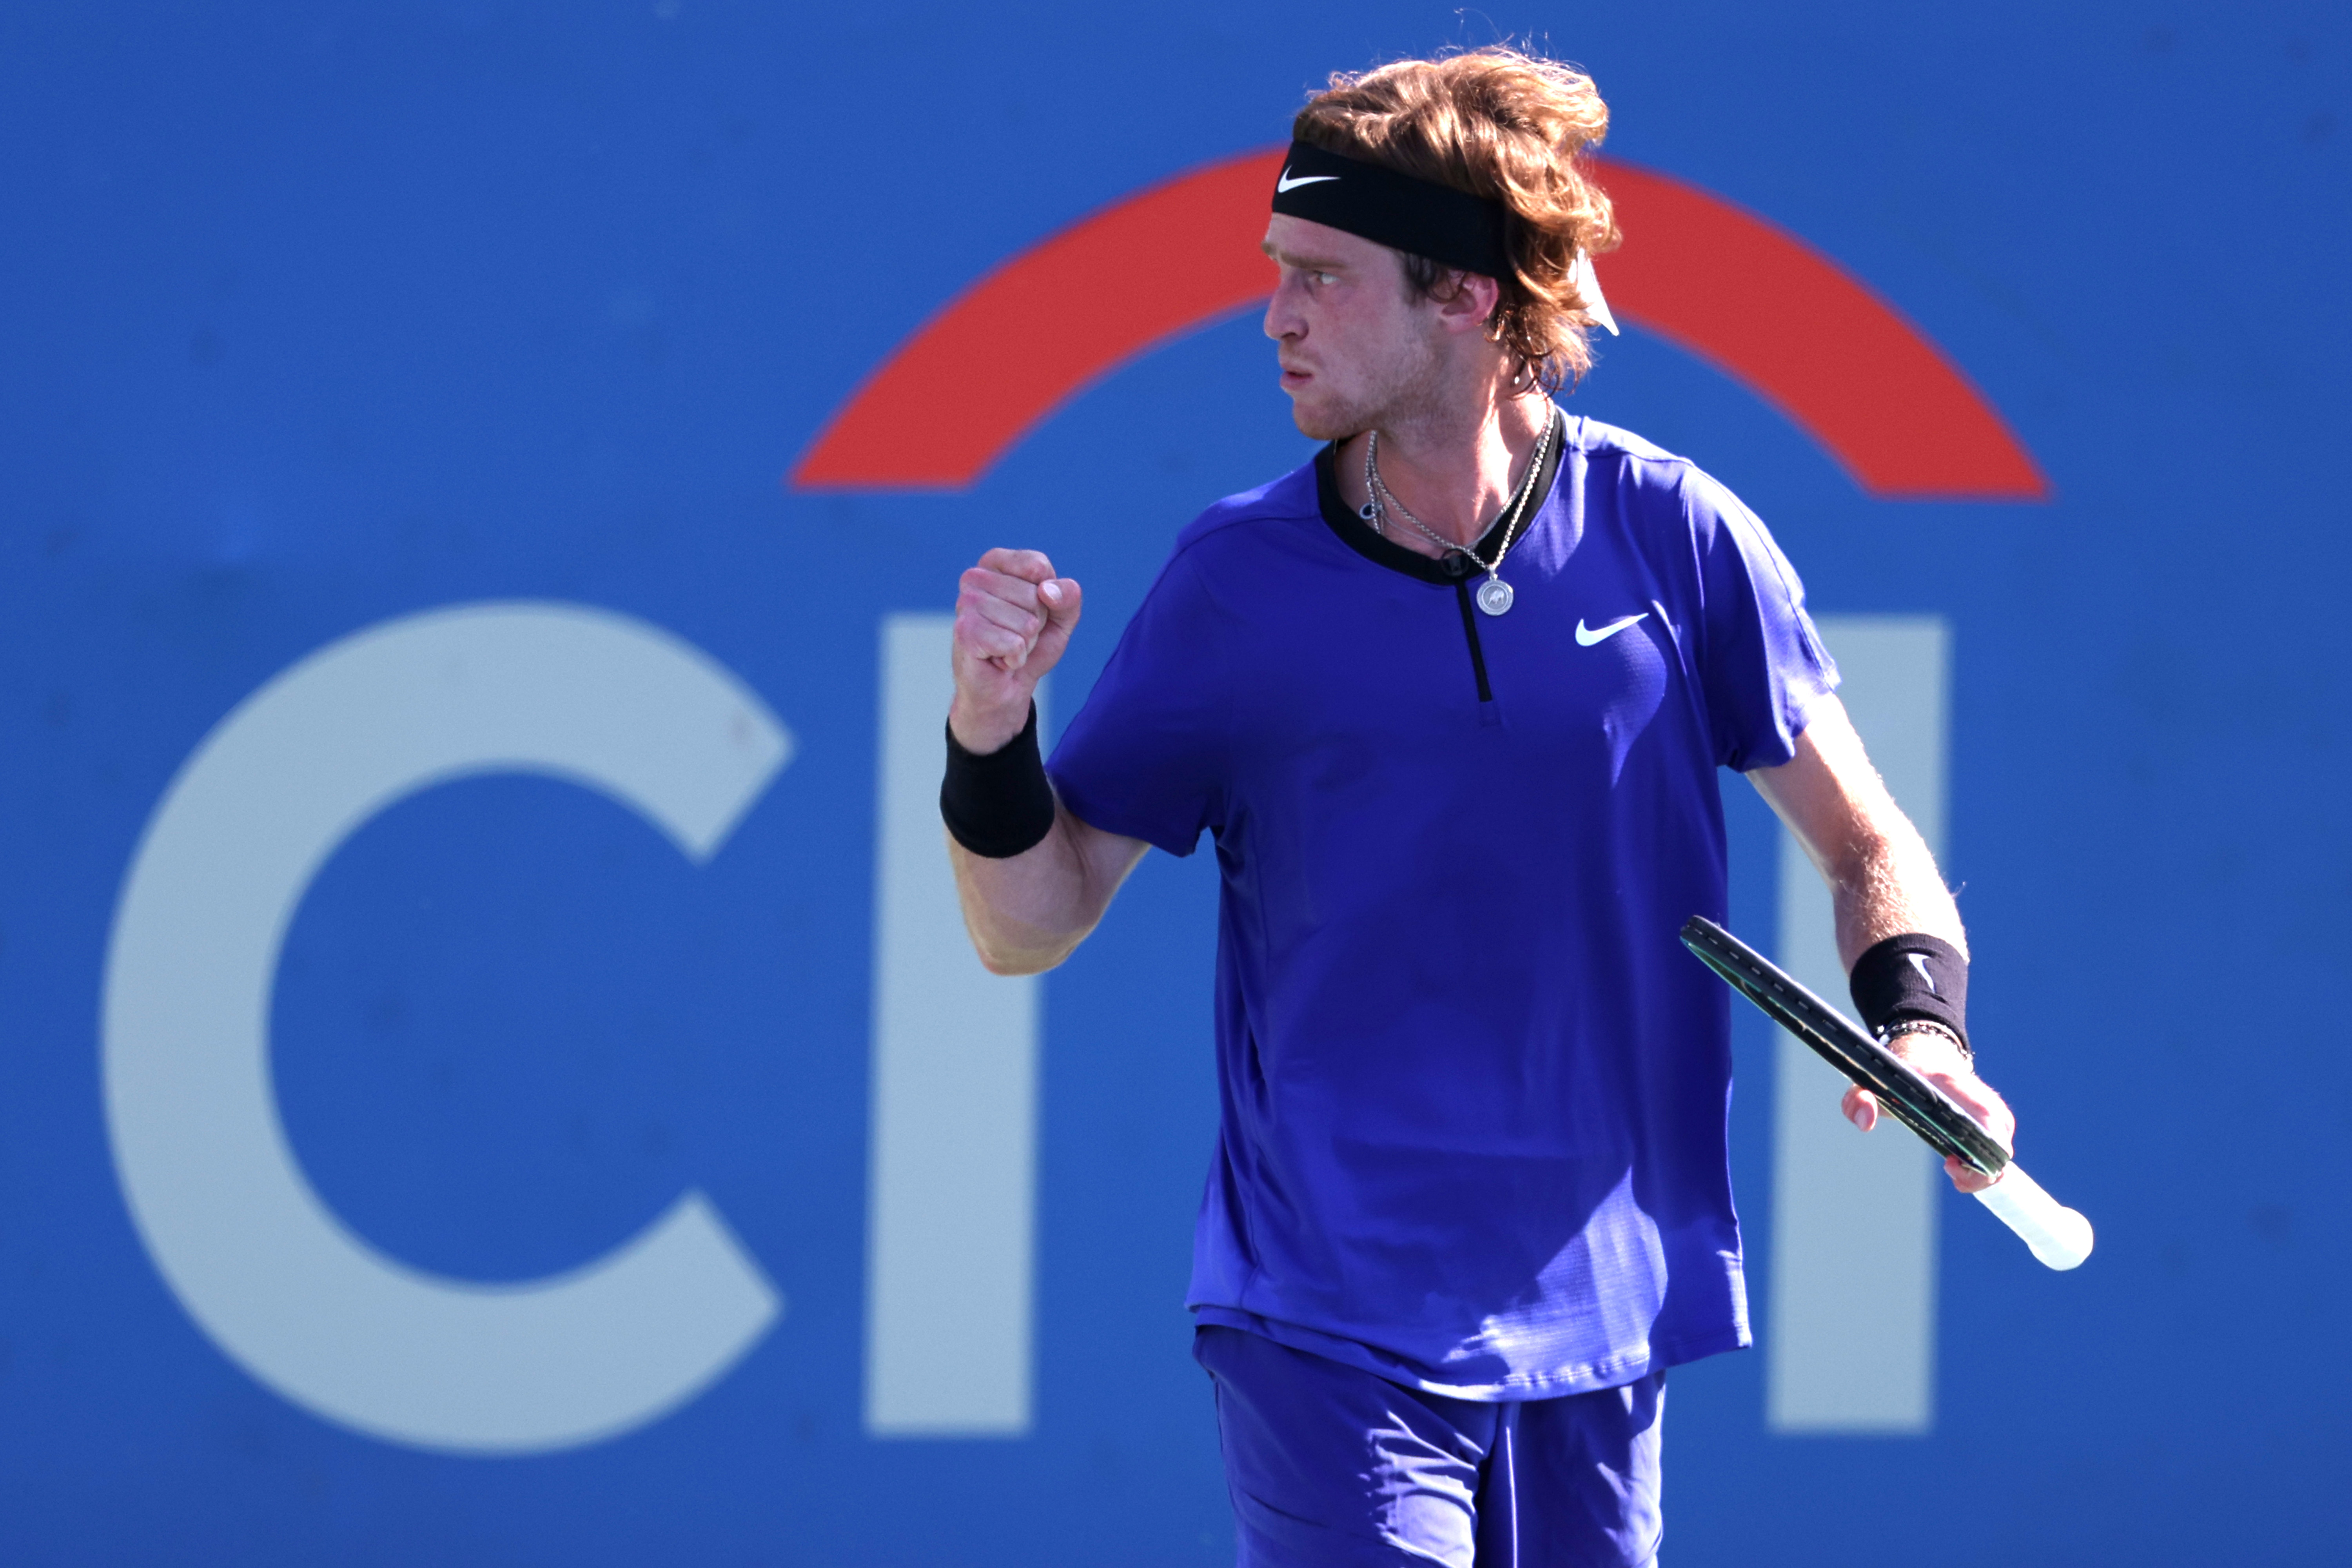 Andrey Rublev reaffirms hope for peace, reflects on viral documentary at Citi Open